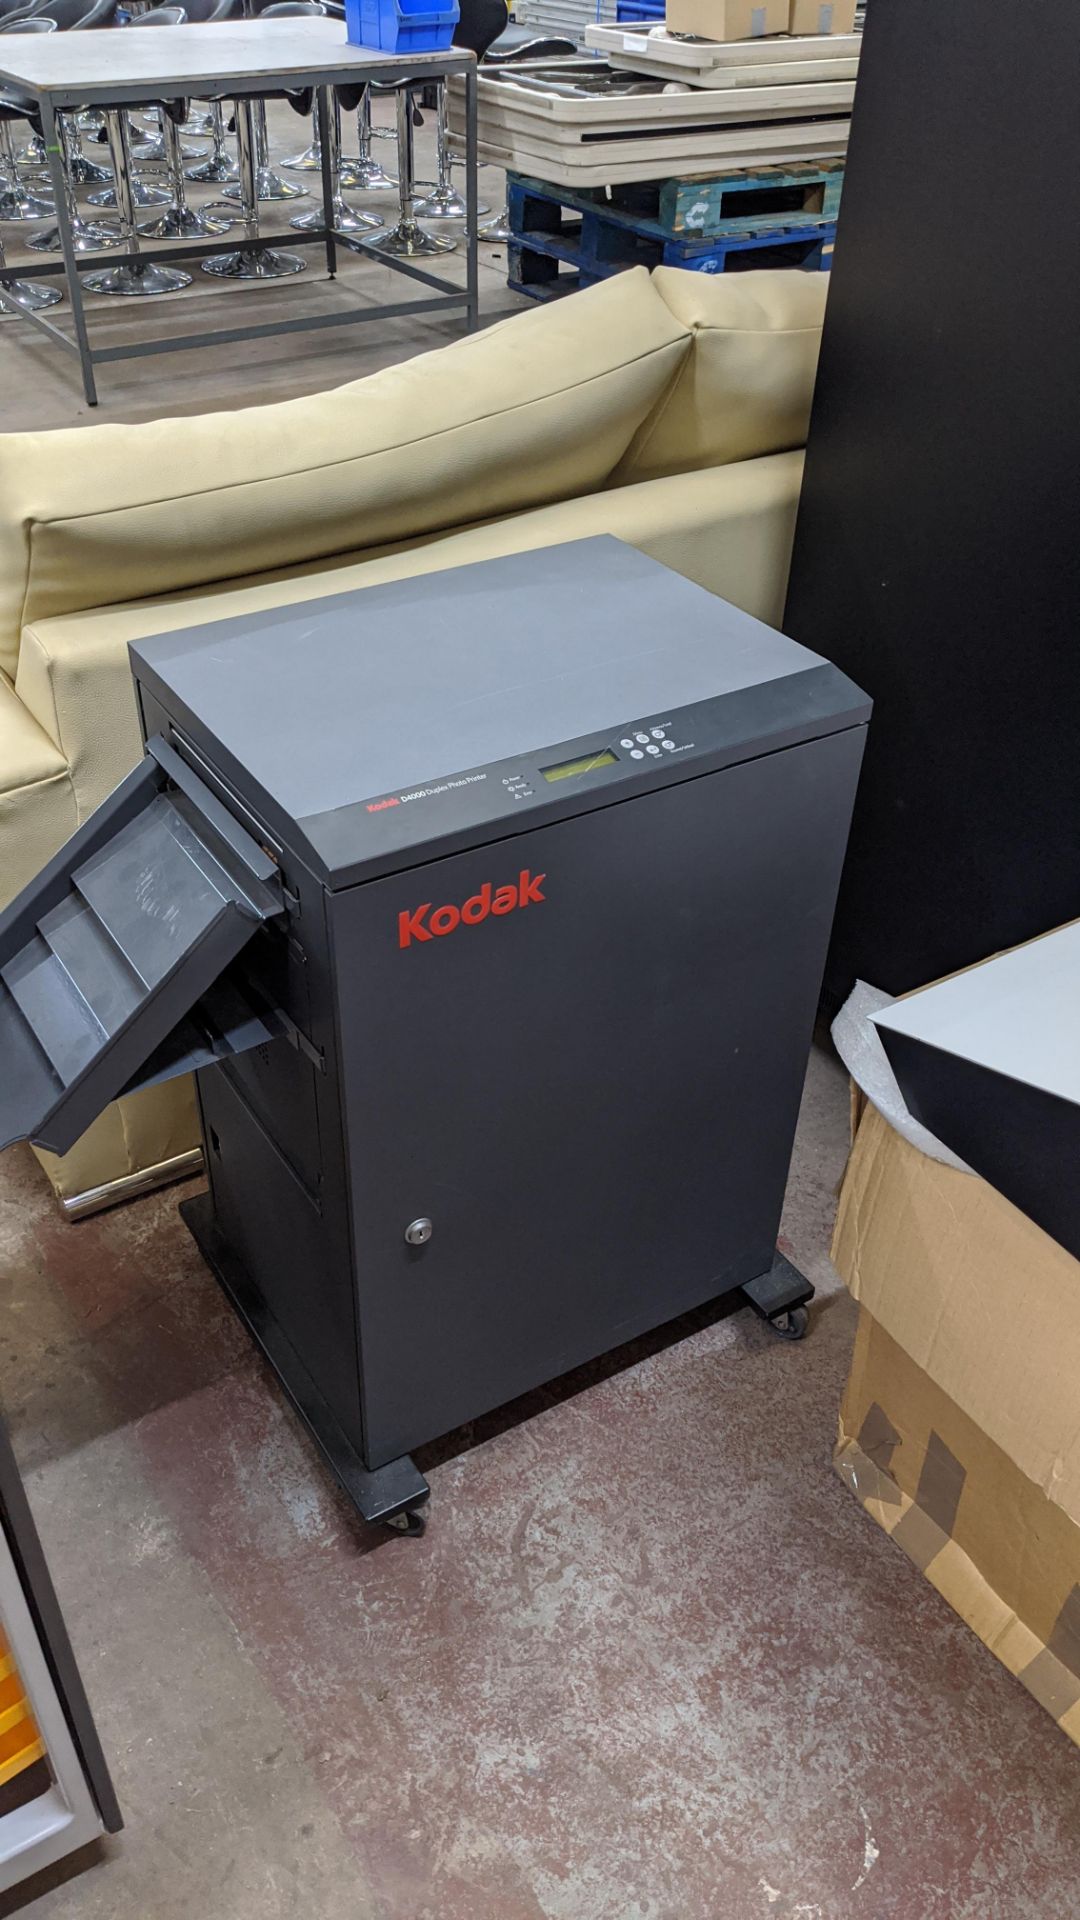 Kodak Photo Print system comprising cabinet, 2 off computers, 2 off 7000 Series printers and D4000 - Image 12 of 21